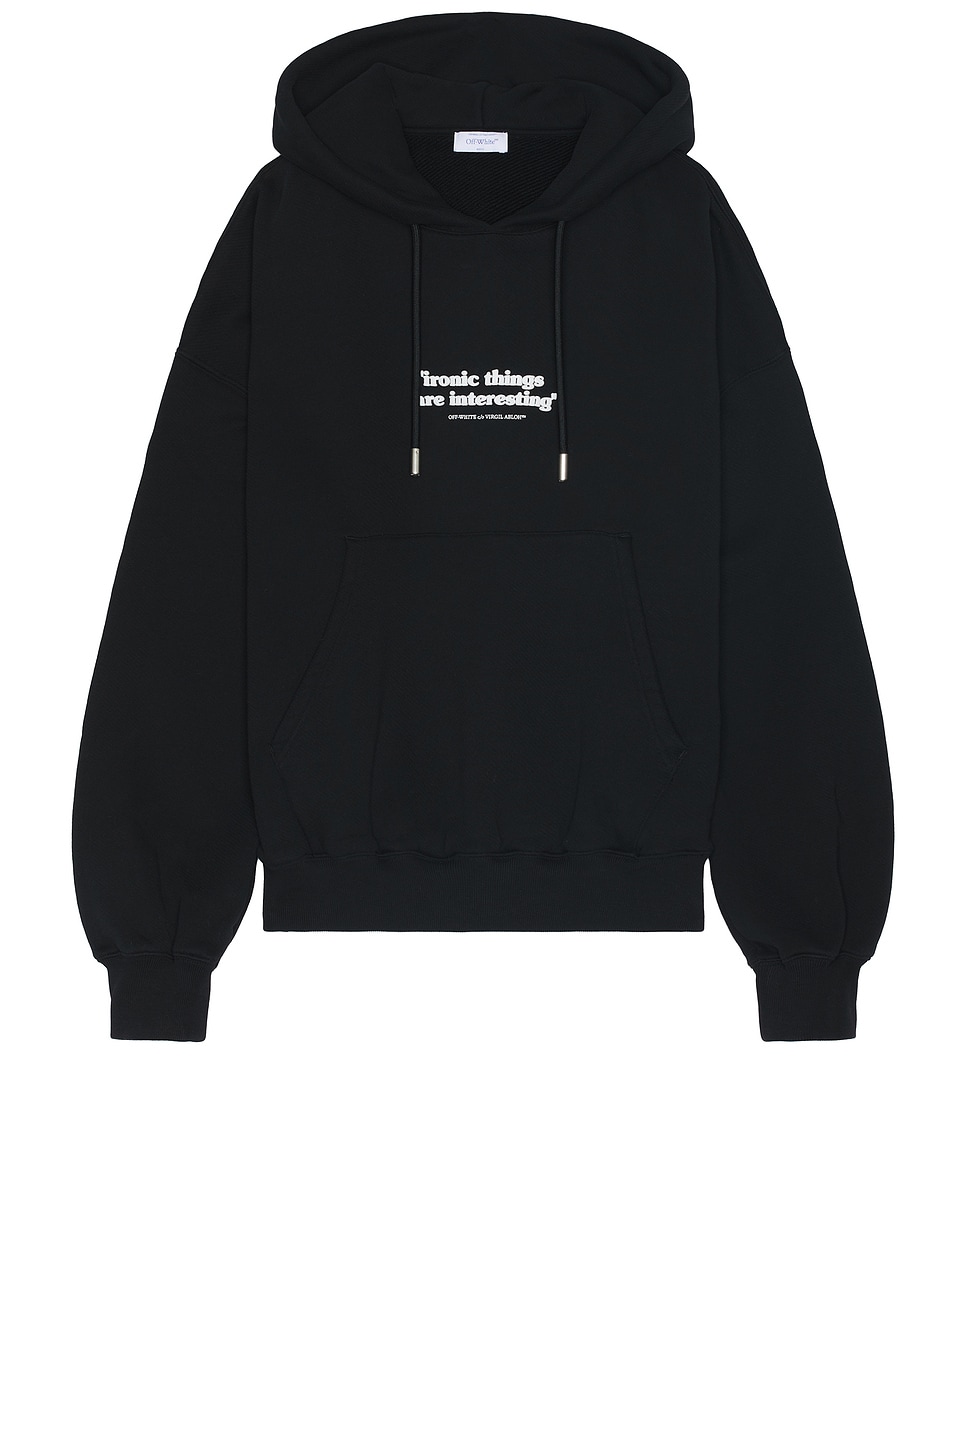 Image 1 of OFF-WHITE Ironic Quote Over Hoodie in Black & White